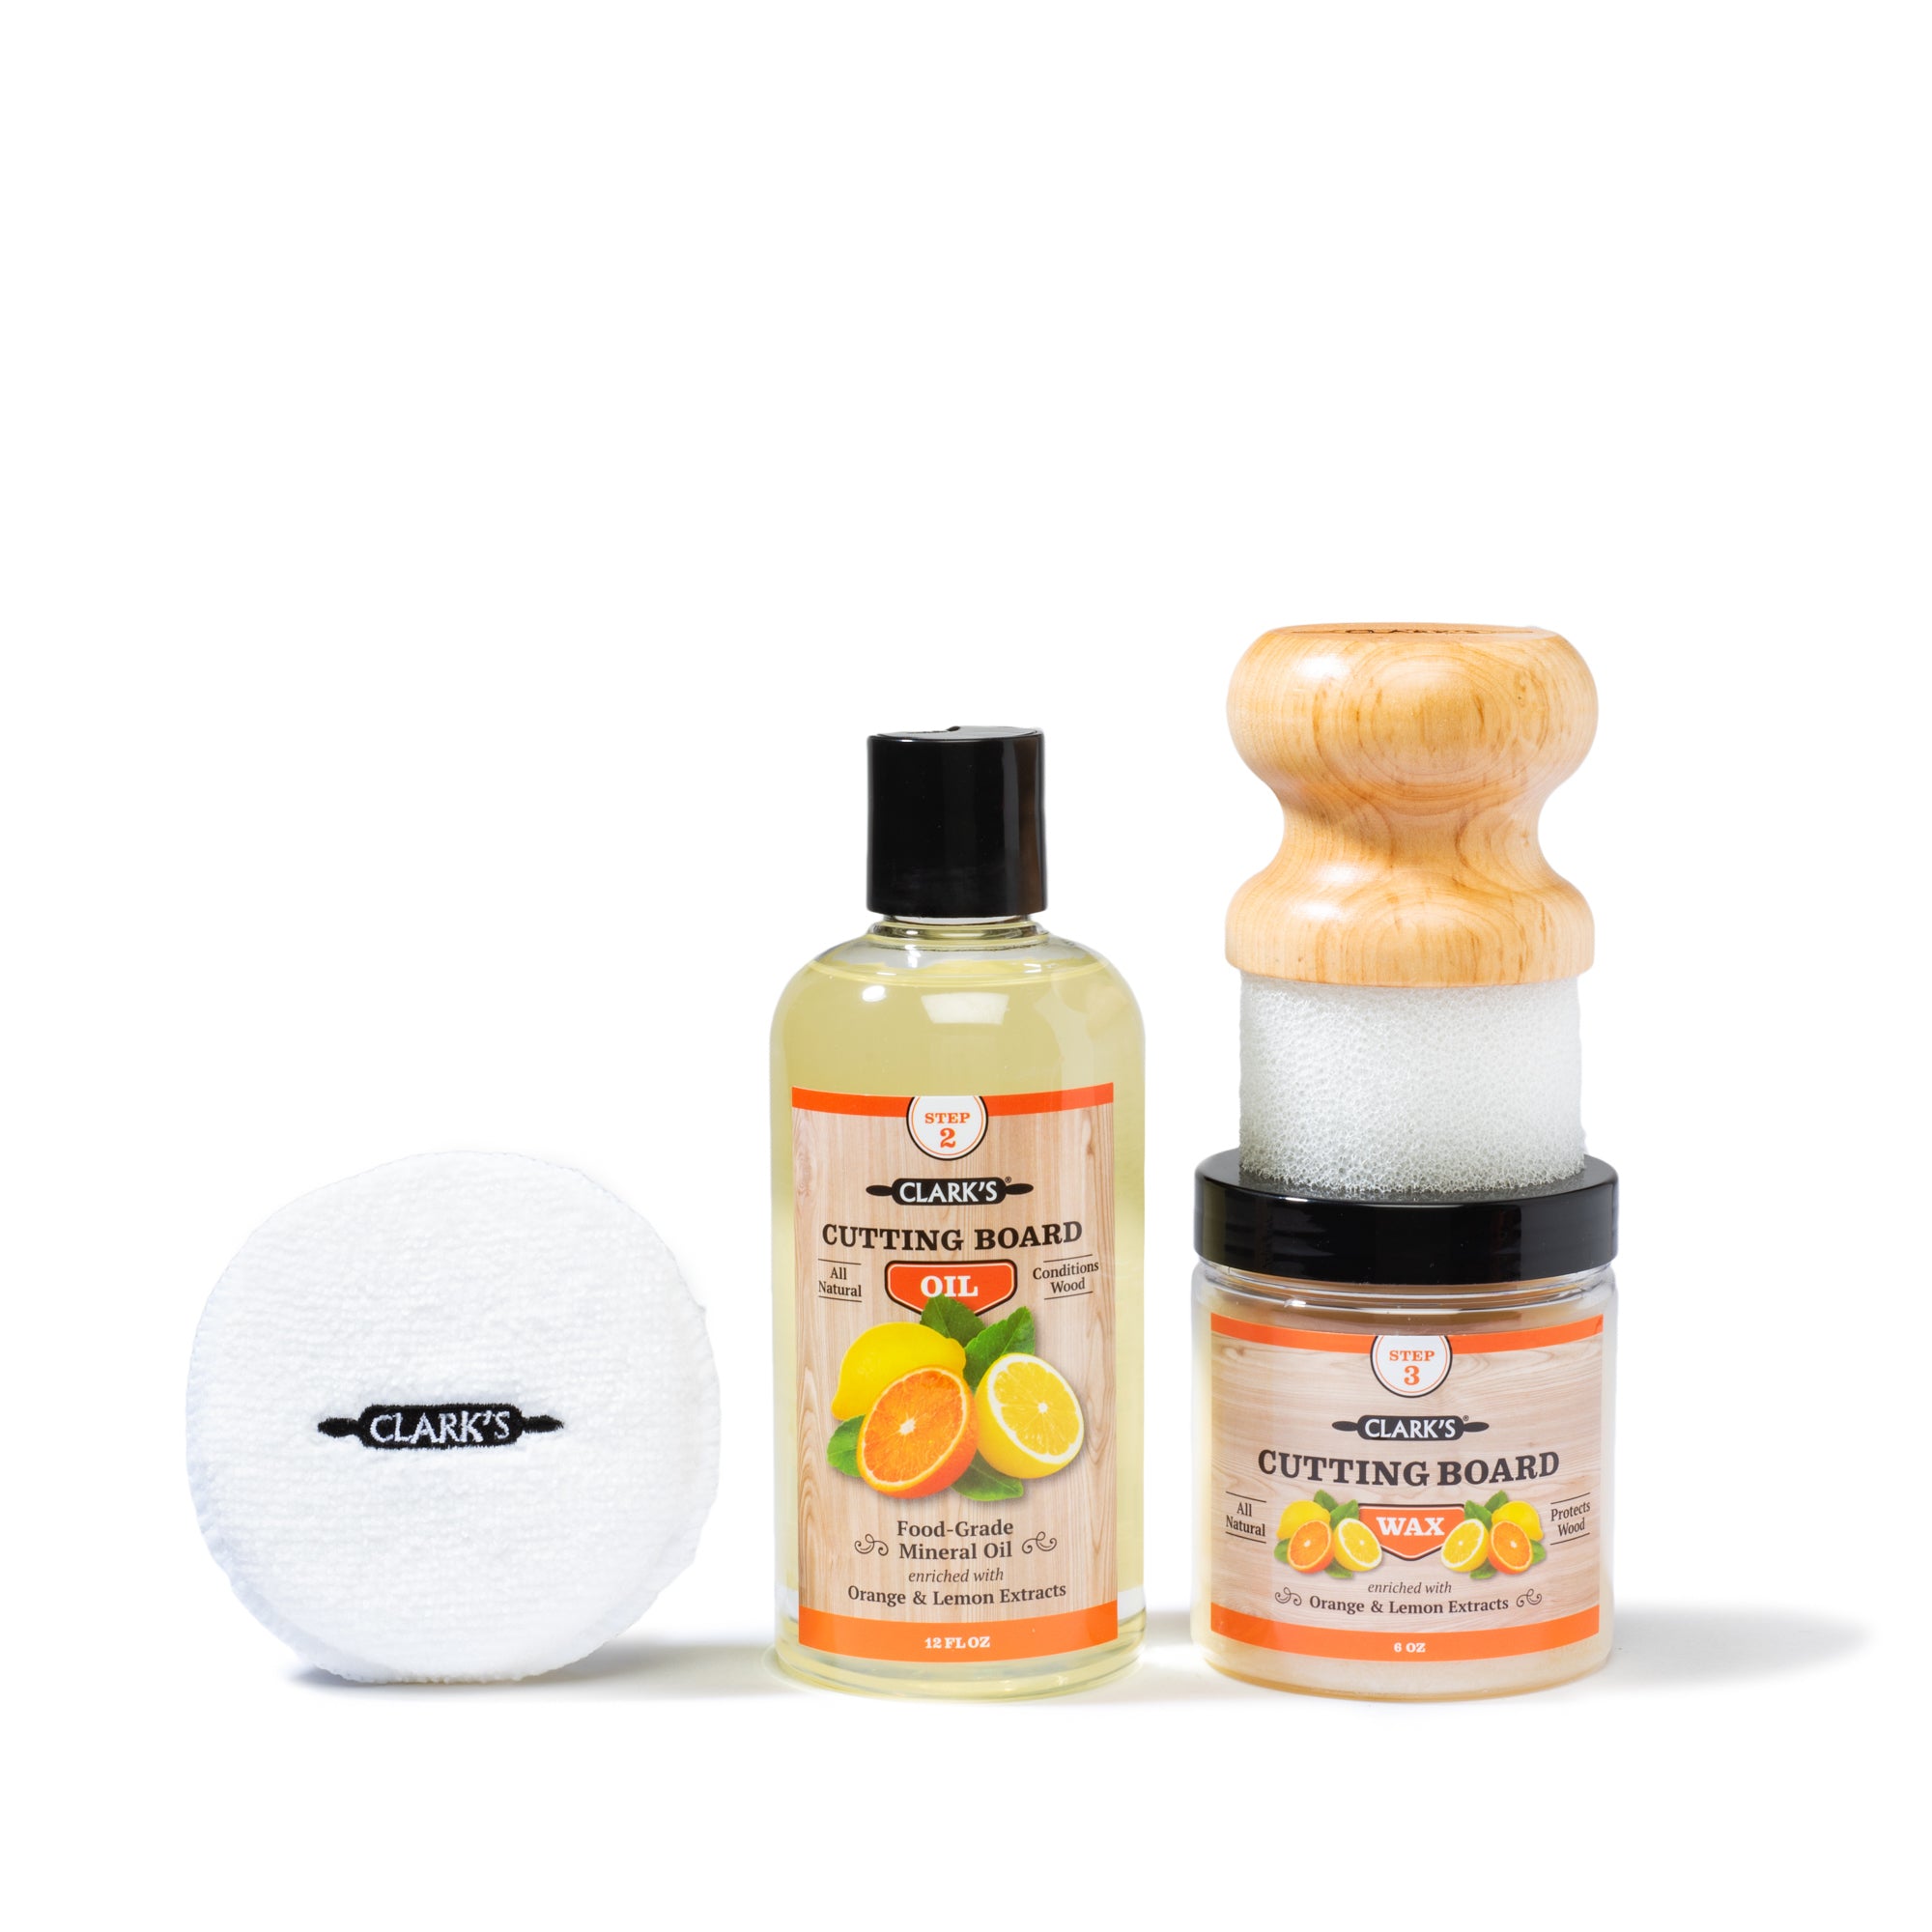 CLARK's Cutting Board Oil and Wax Kit – Set includes Food Grade